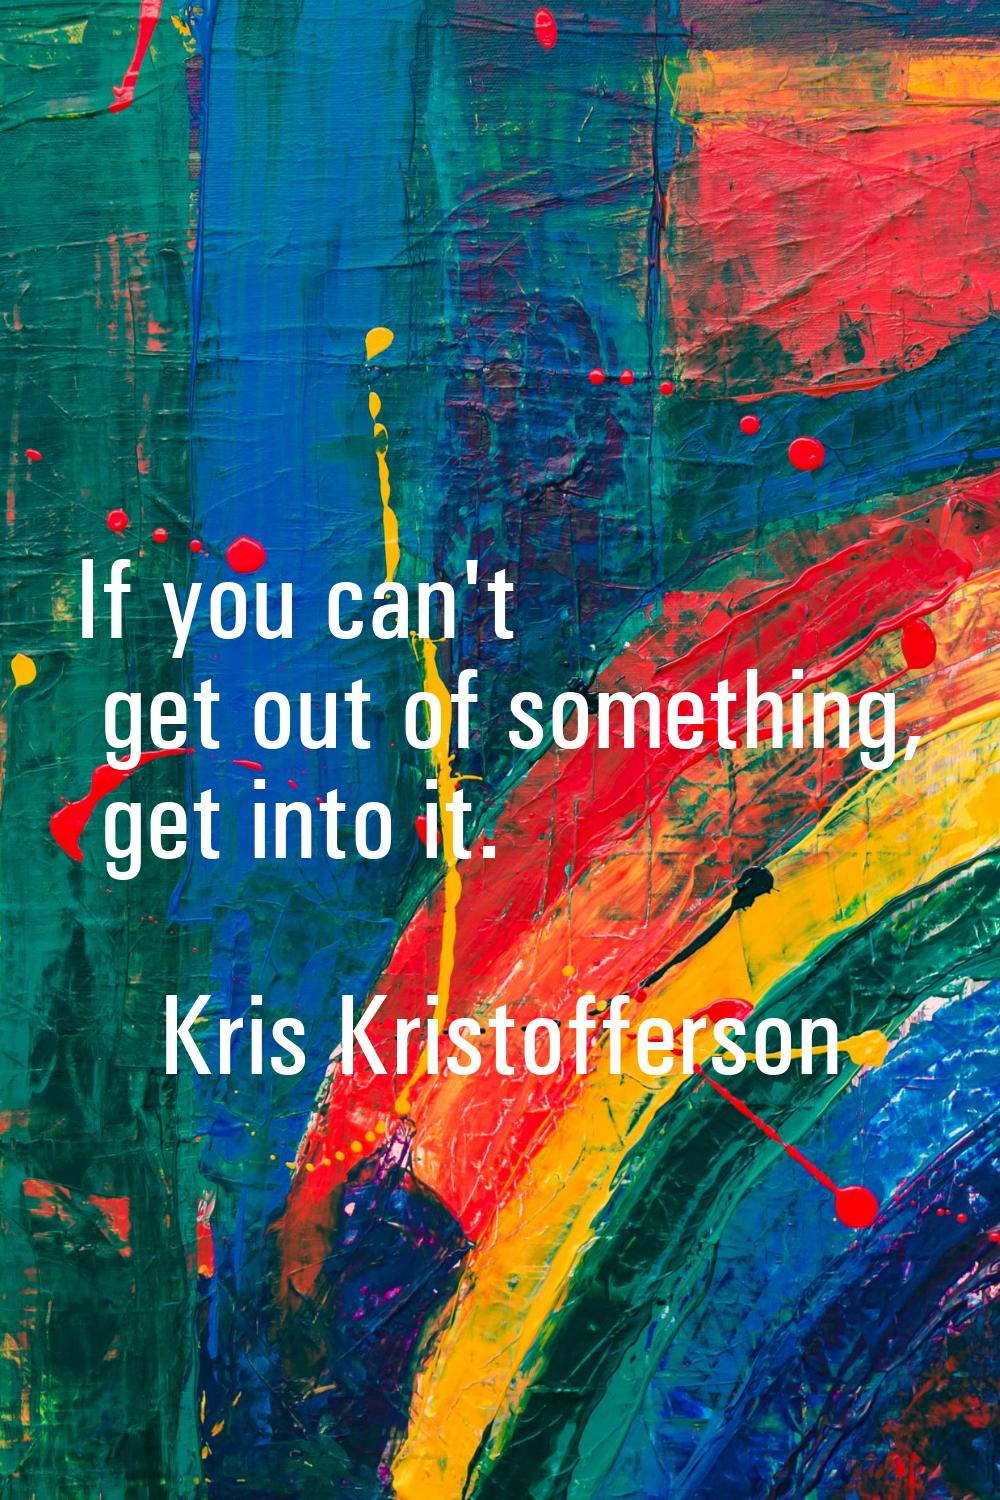 If you can't get out of something, get into it.